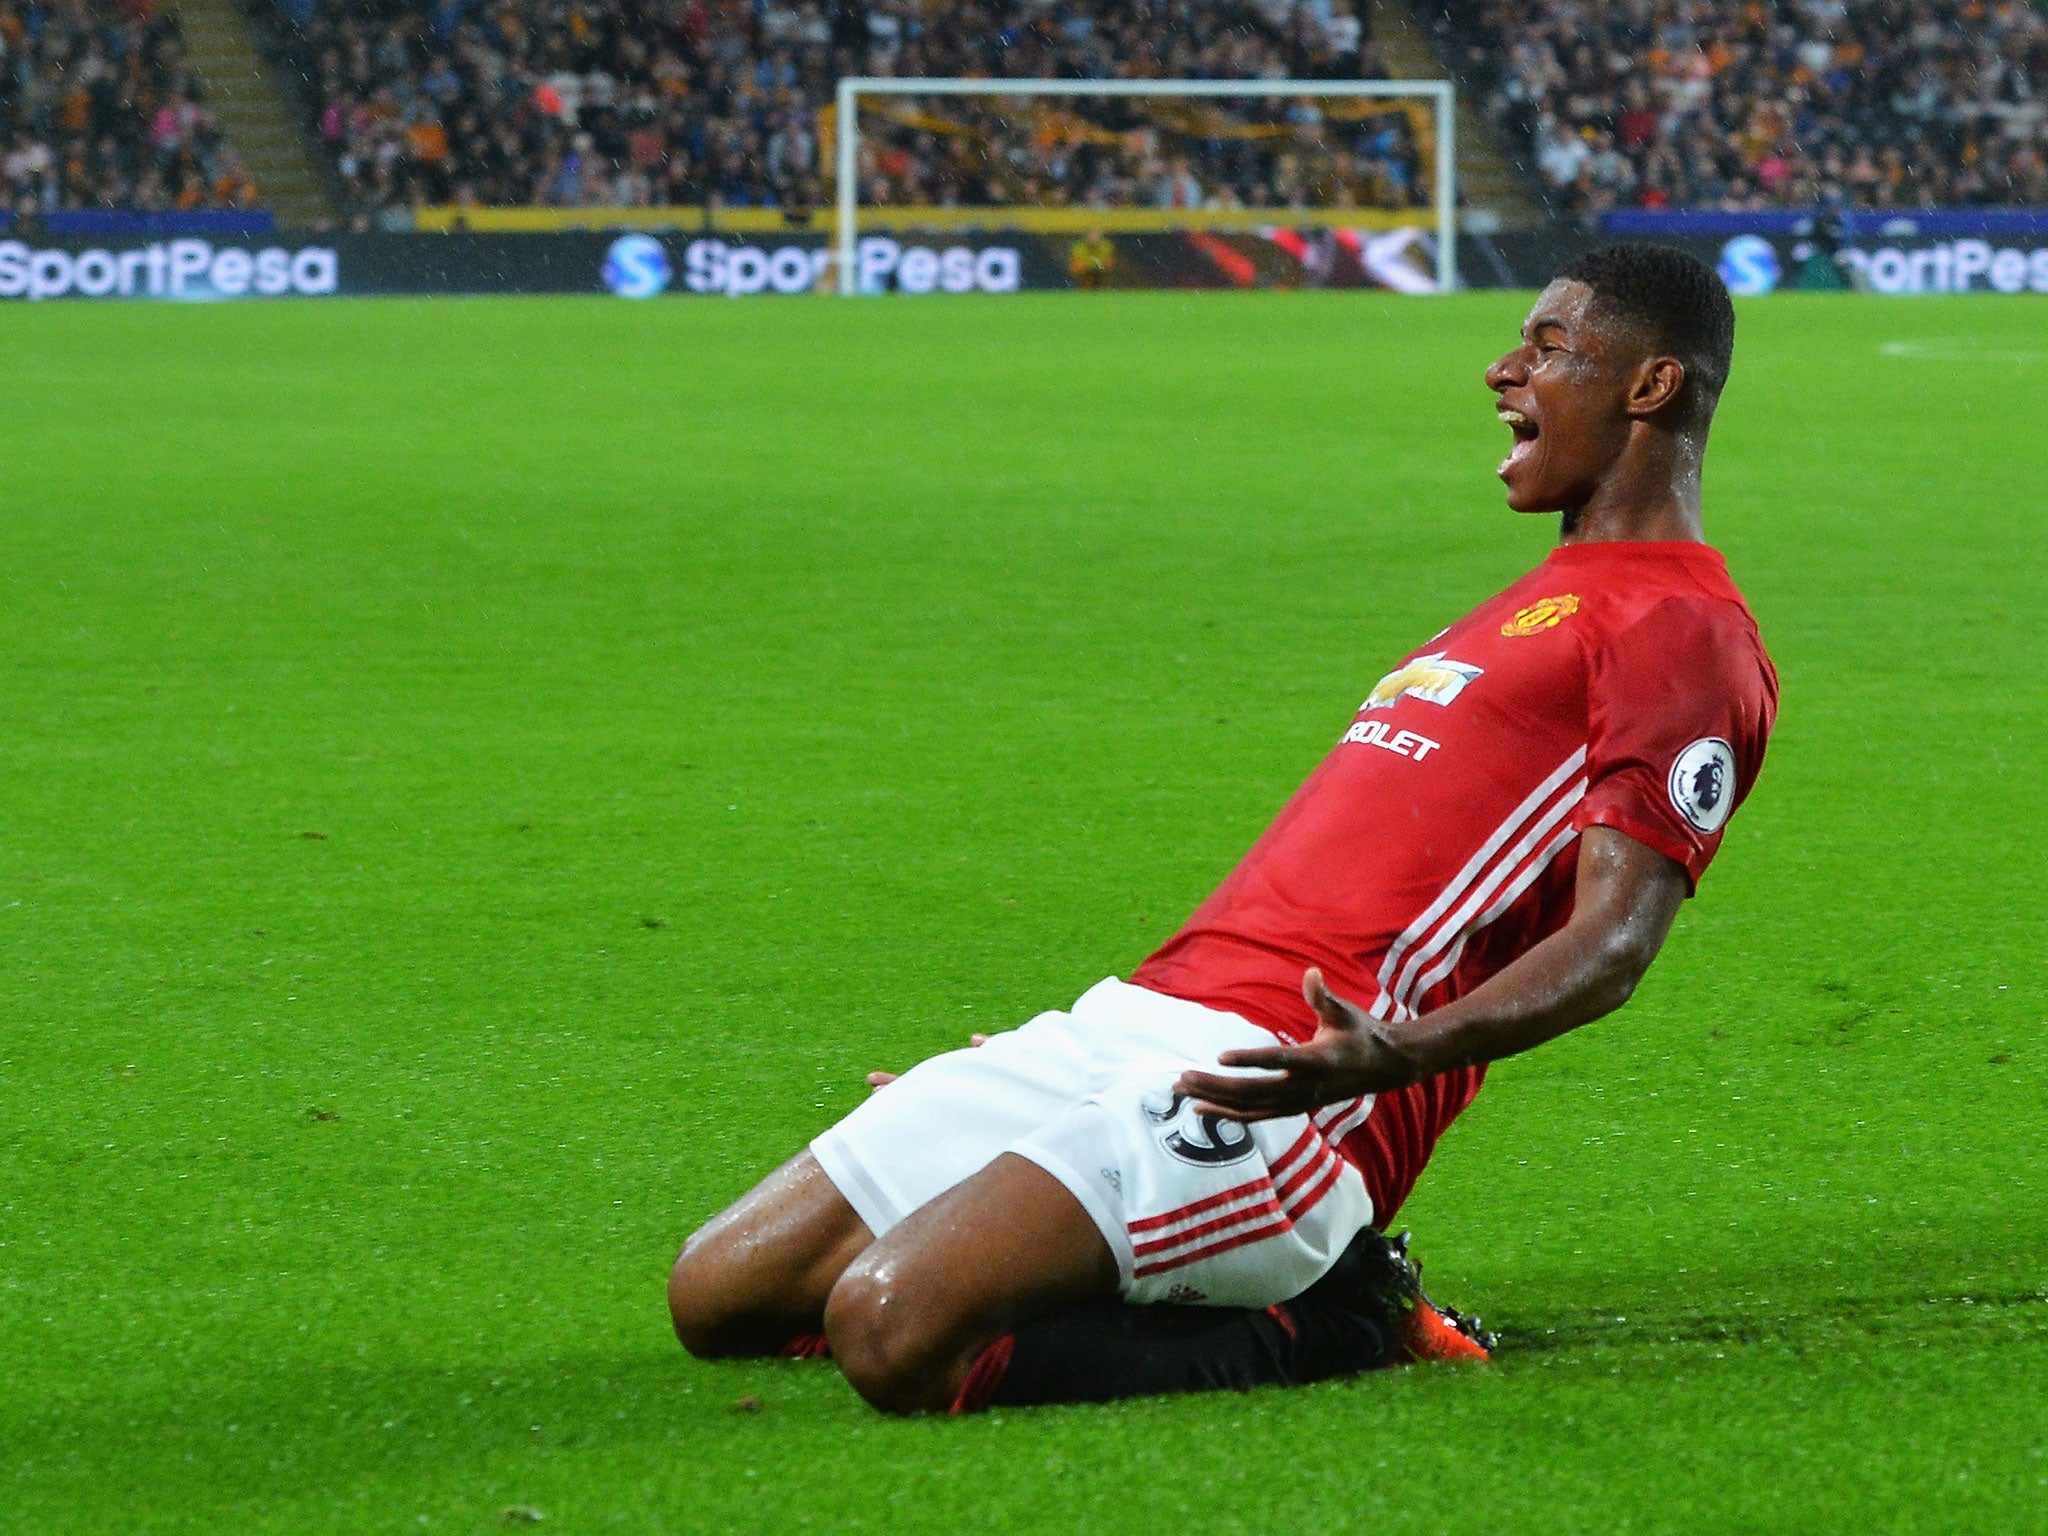 Rashford came on late against Hull to clinch a late winner for United two weekends ago